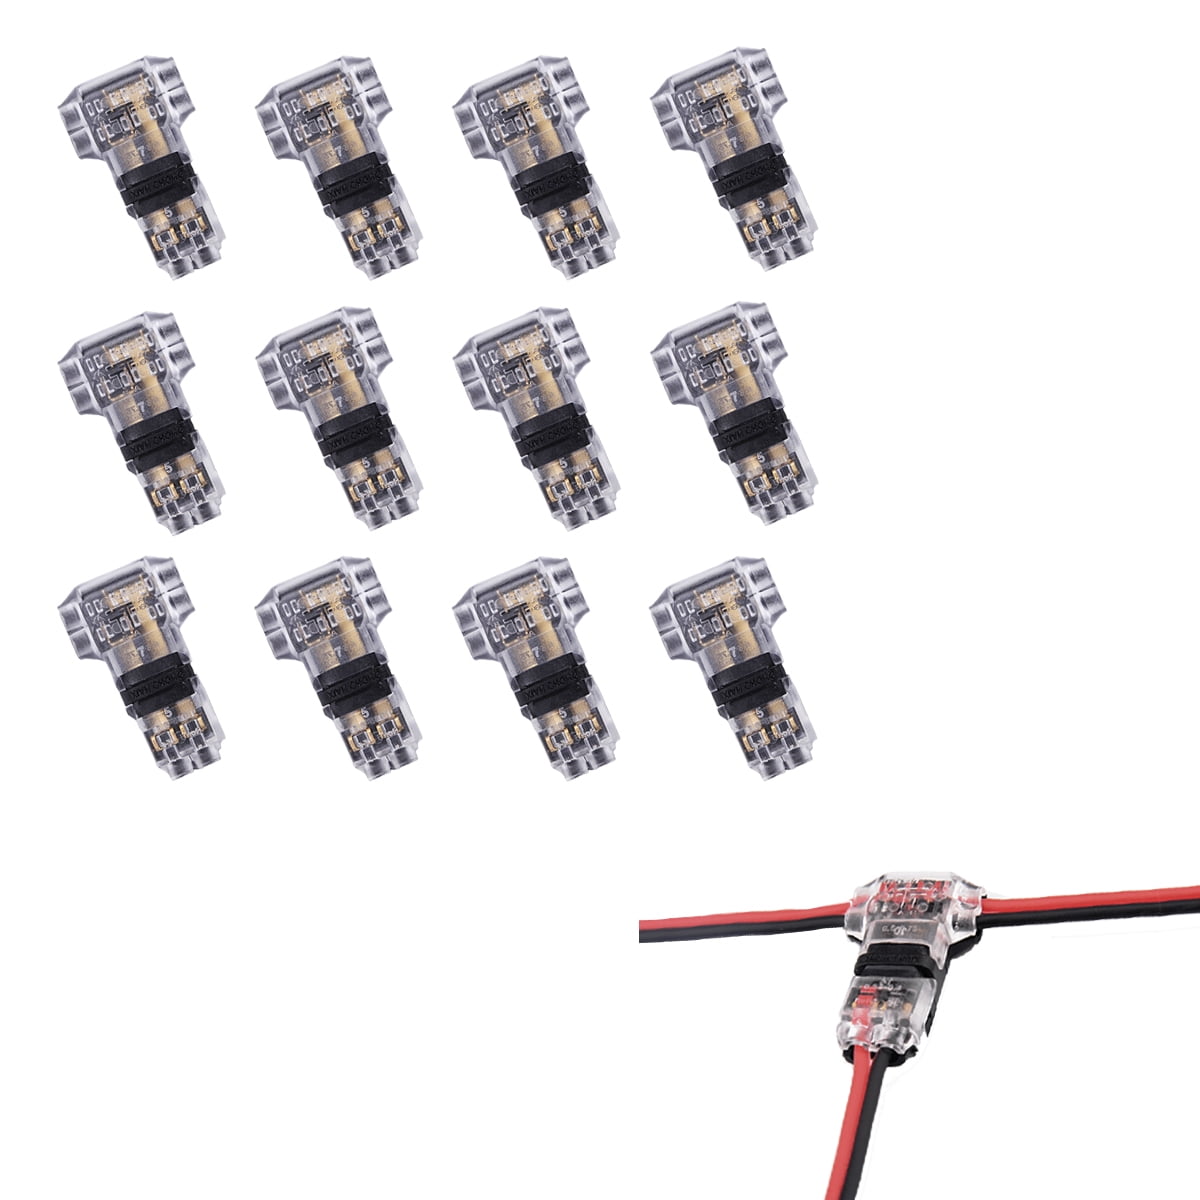 Wire Connectors Low Voltage T Tap Wire Connectors T Type 2 Pin Solderless No Wire Stripping Required for Mid-span Branching in Wires Connection Fits 24-20 AWG Cable Wires Pack of 15 